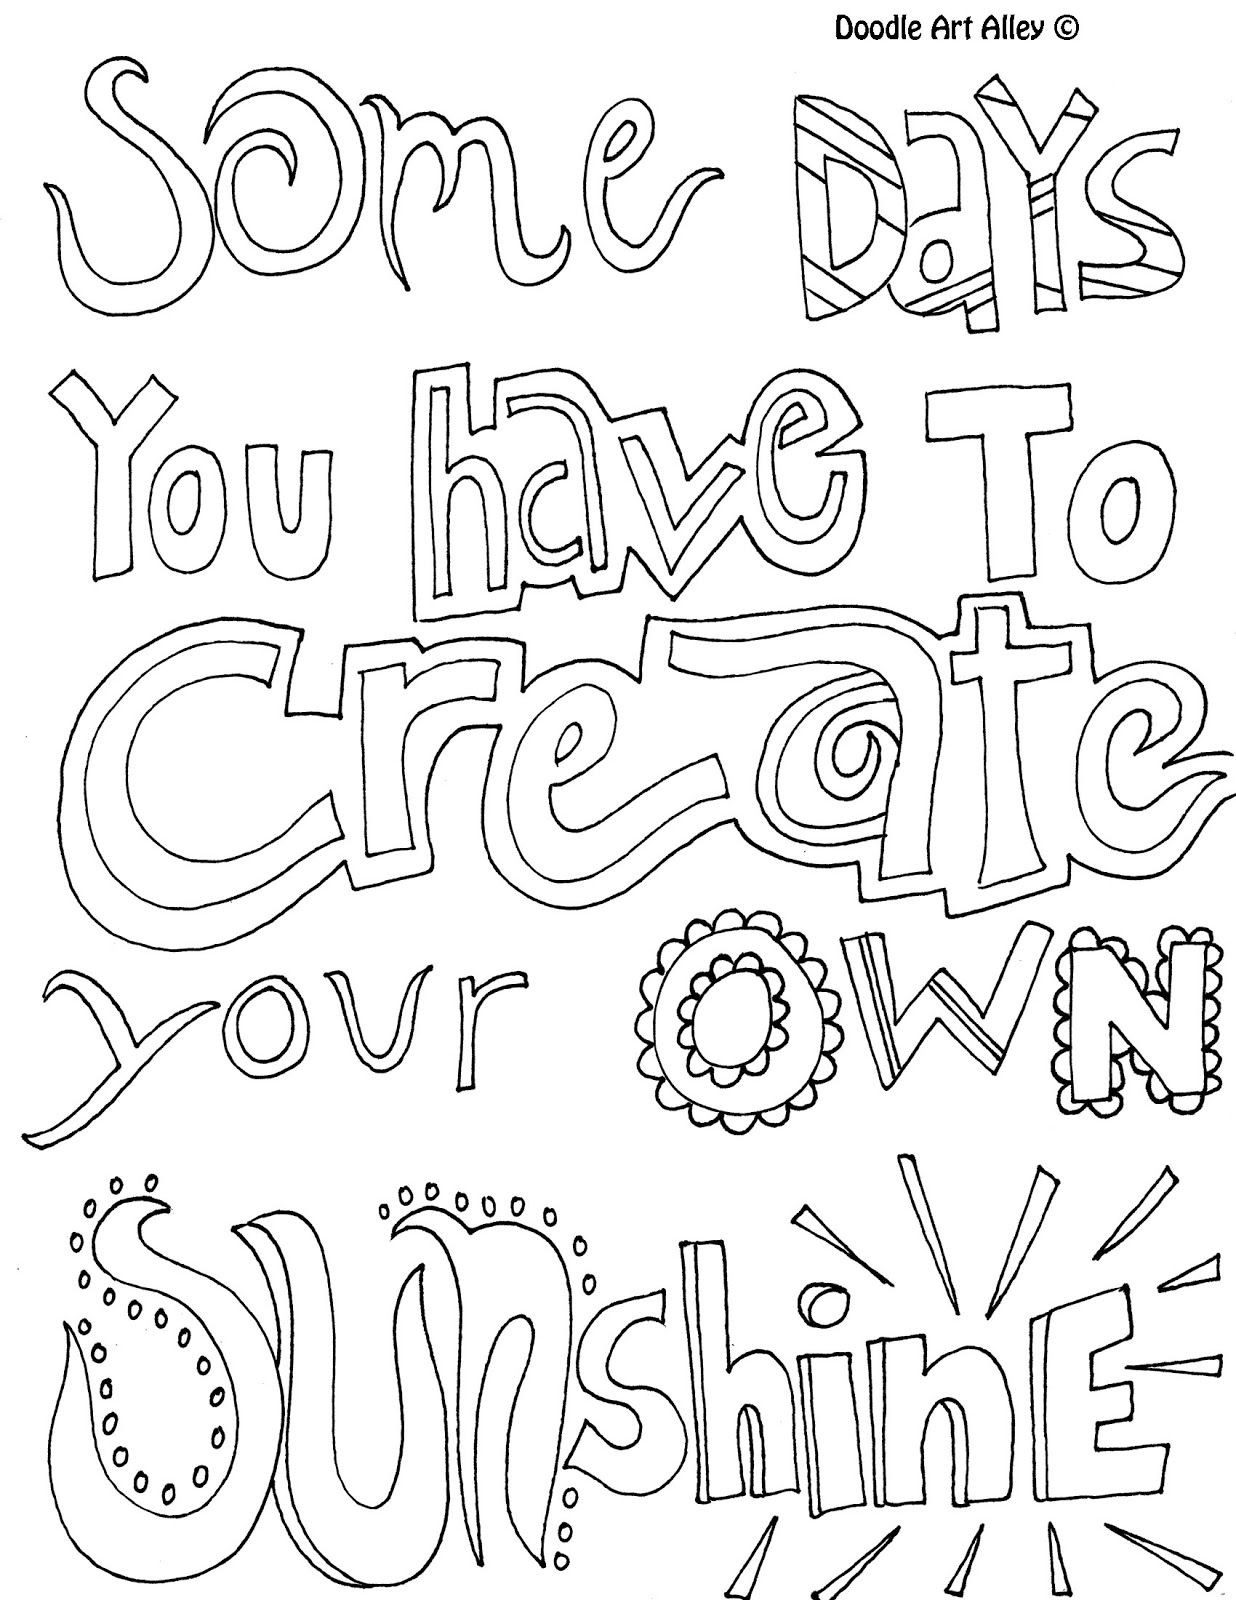 Quotes Coloring Pages For Adults
 All quotes coloring pages great quotes doodle page great